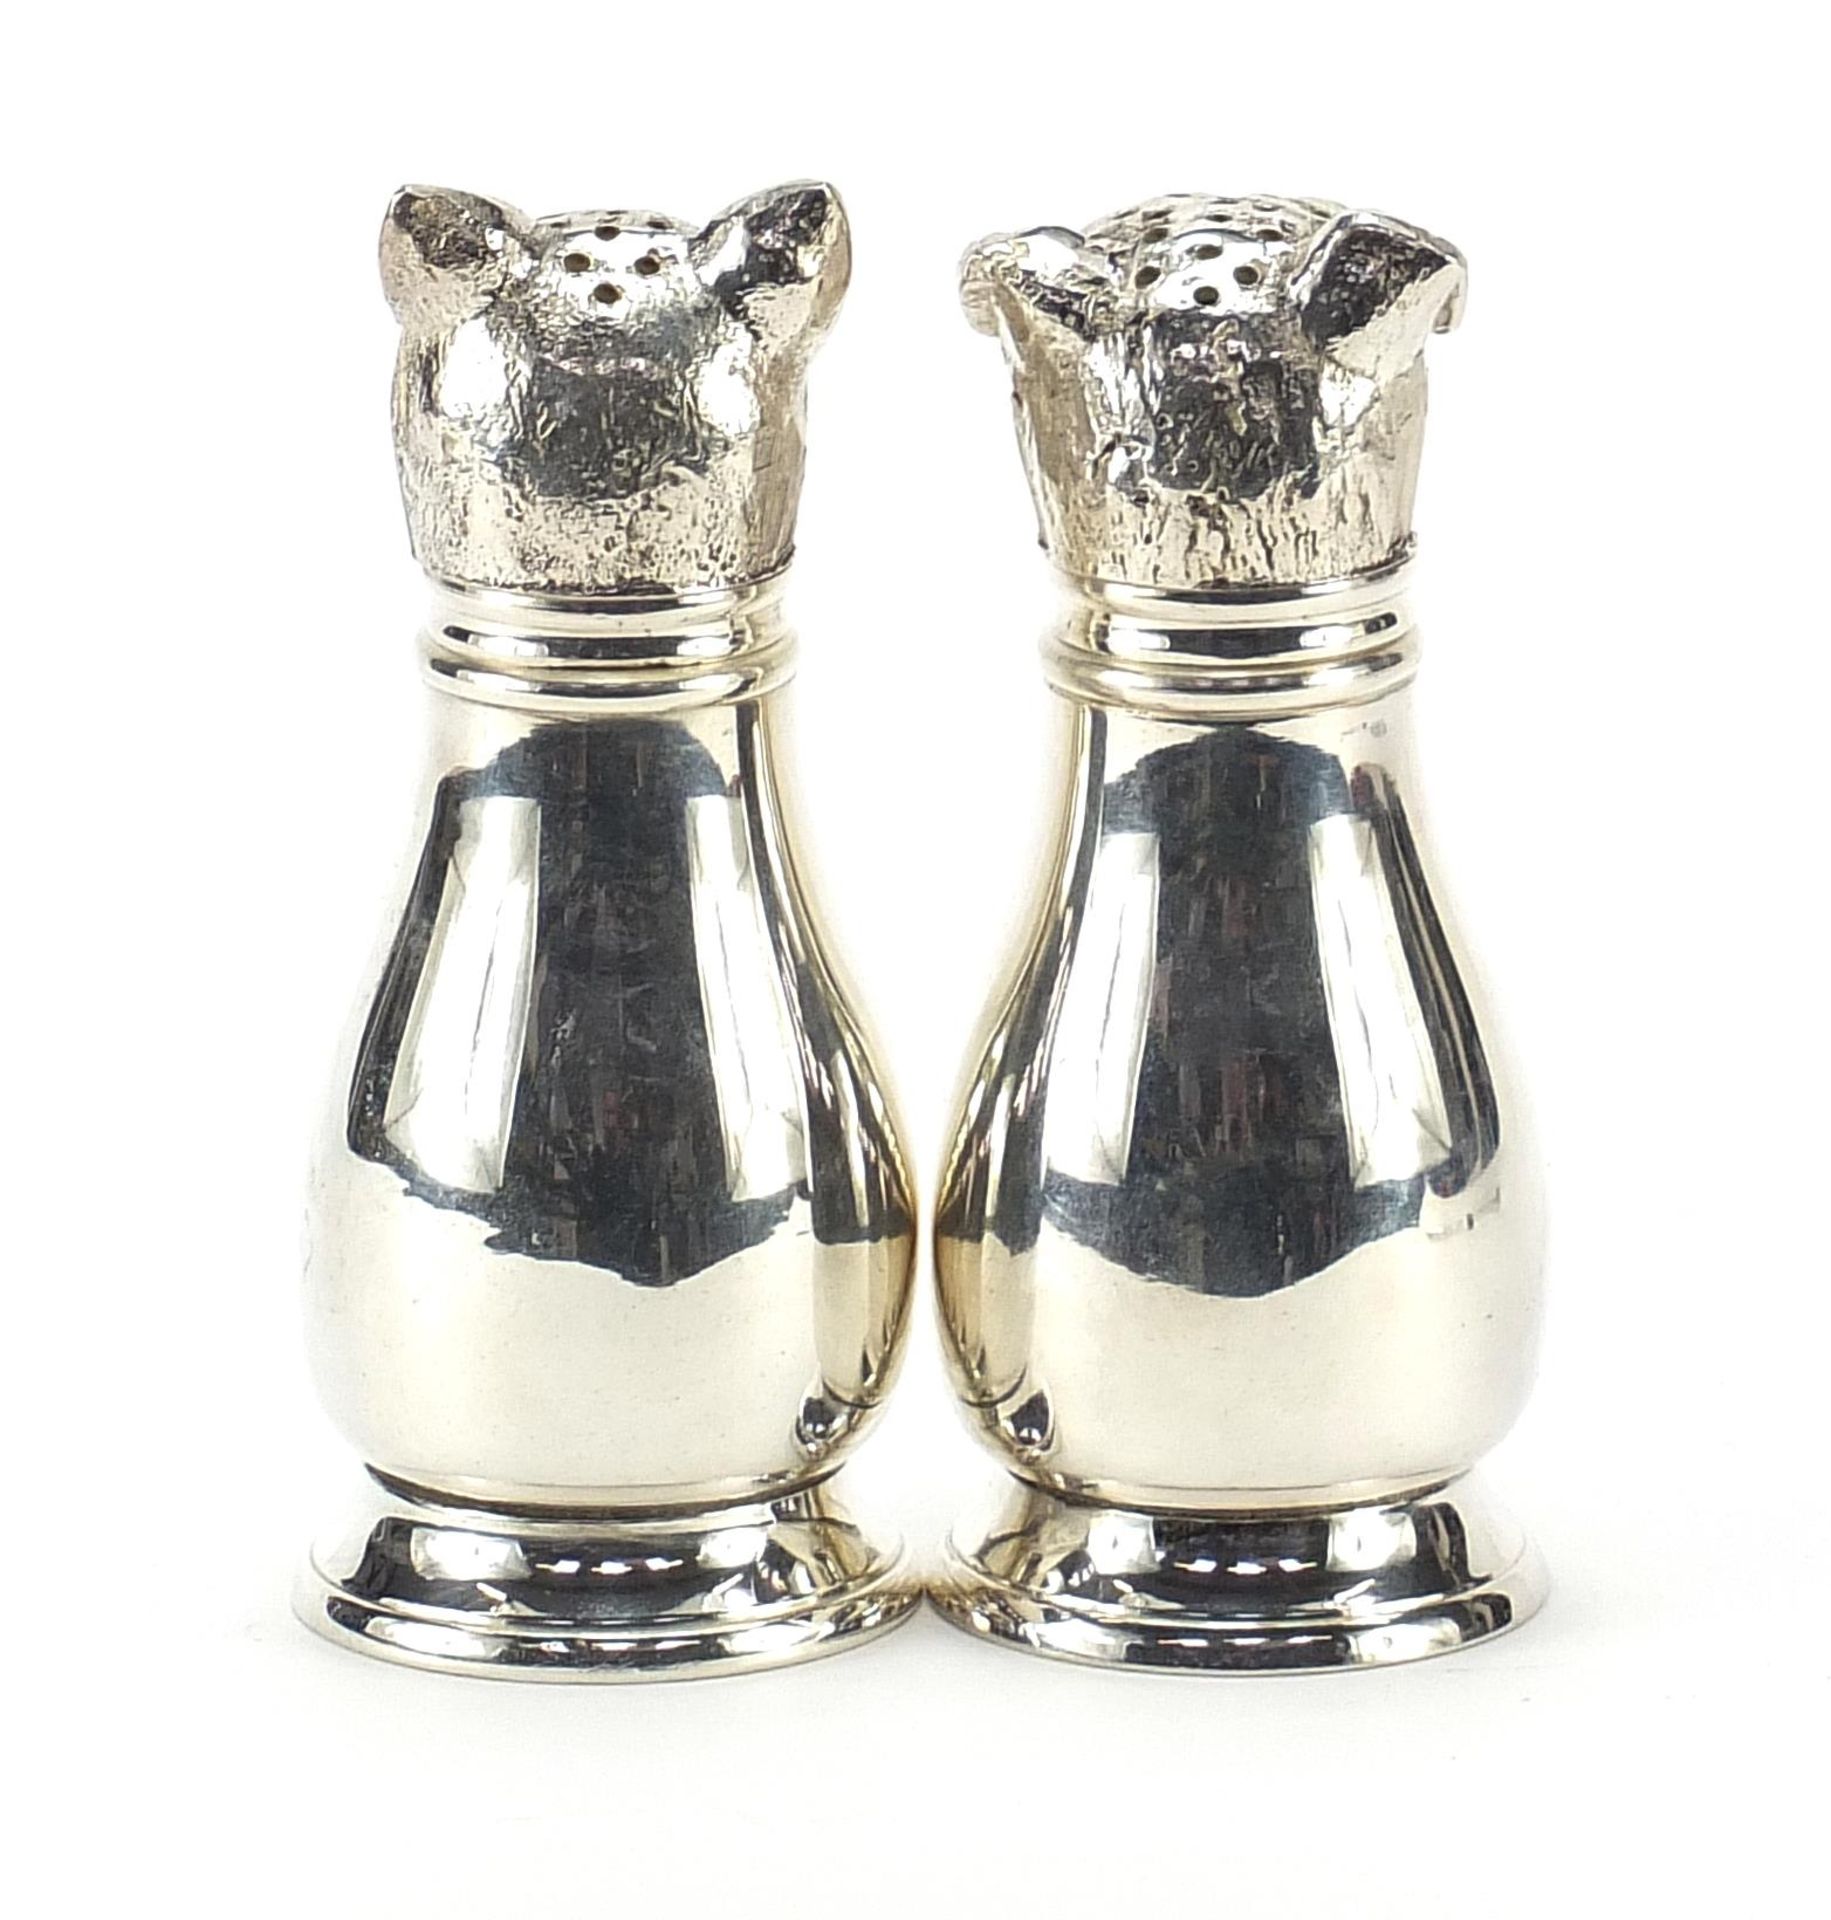 Pair of novelty silver plated casters in the form of a cat and dog, 11cm high - Image 2 of 4